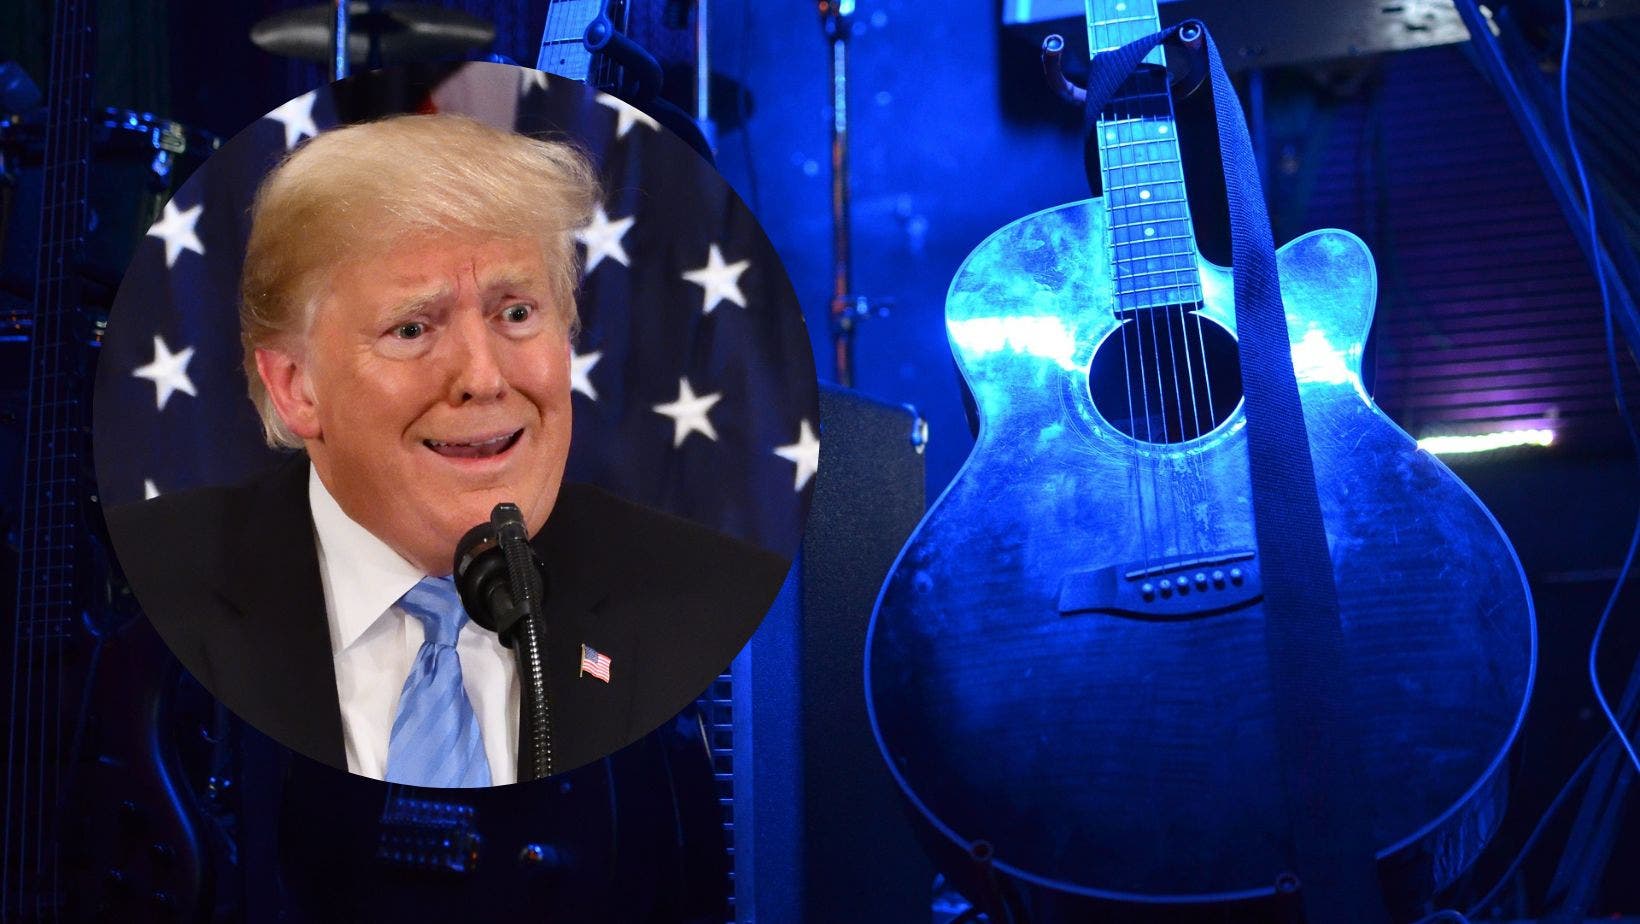 Don't Stop Believin': These Bandmates Are Fighting Over Support For Donald Trump